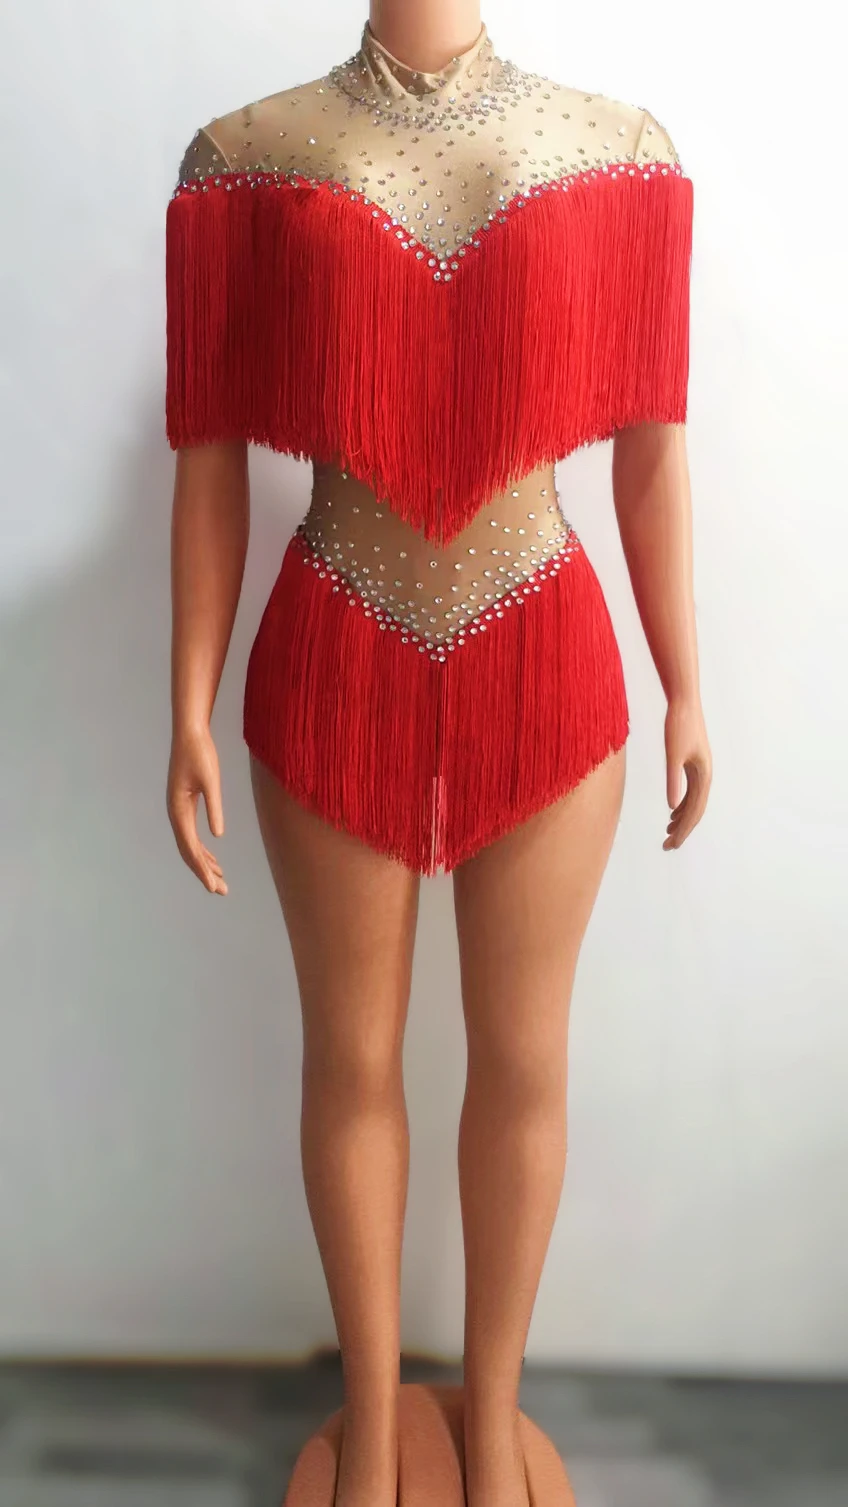 

Sexy Tassels 7 Colors Fringes Latin Dance Leotard Outfit Birthday Celebrate Costume Performance Bodysuit Costume